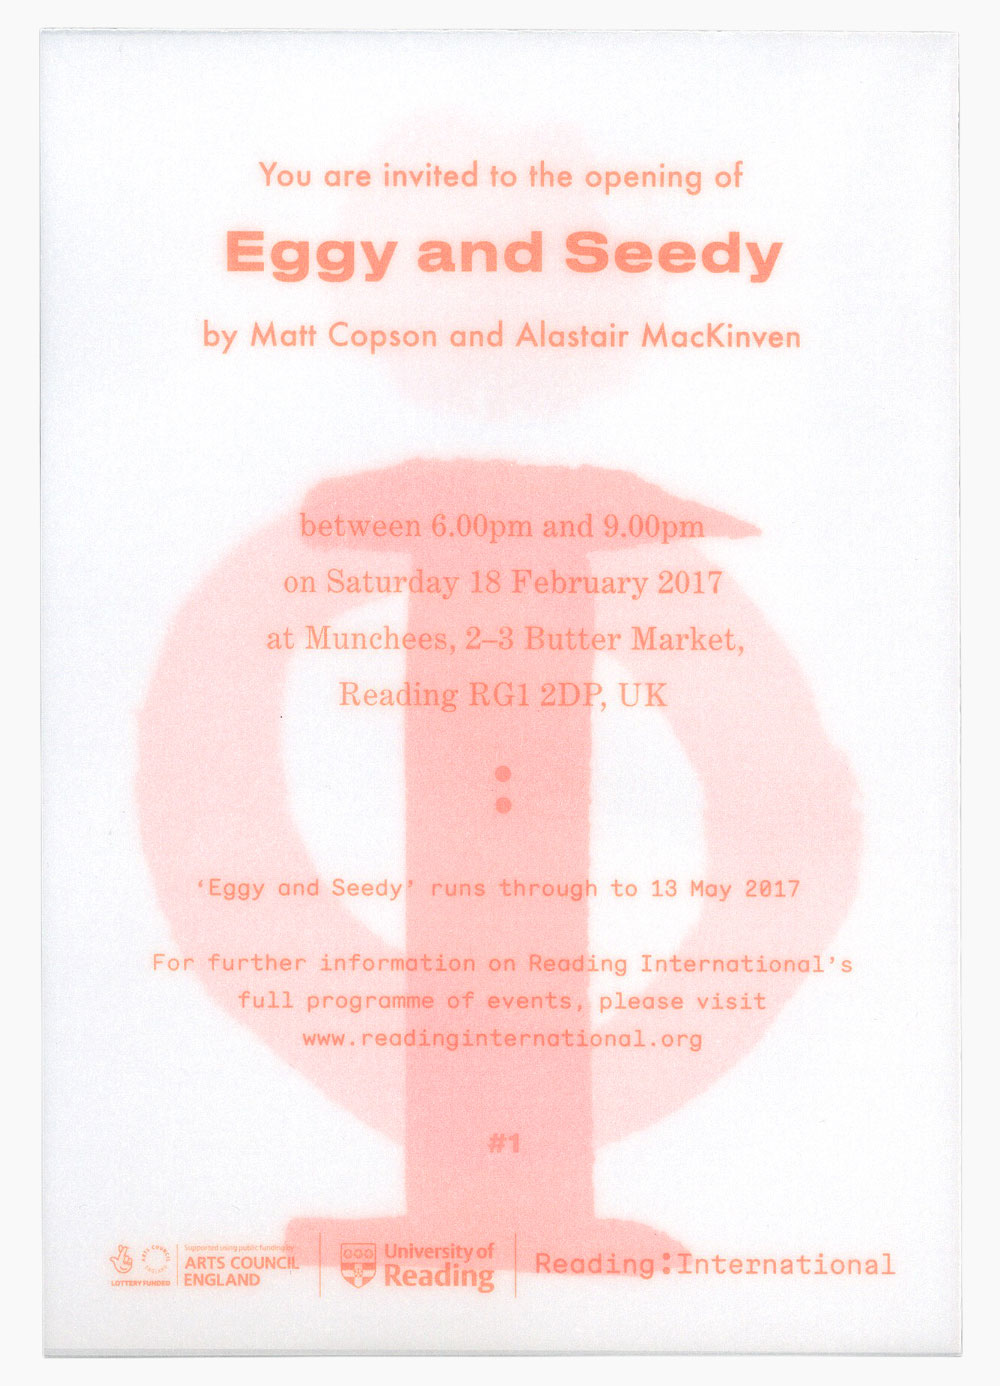 Invitation card to Eggy and Seedy